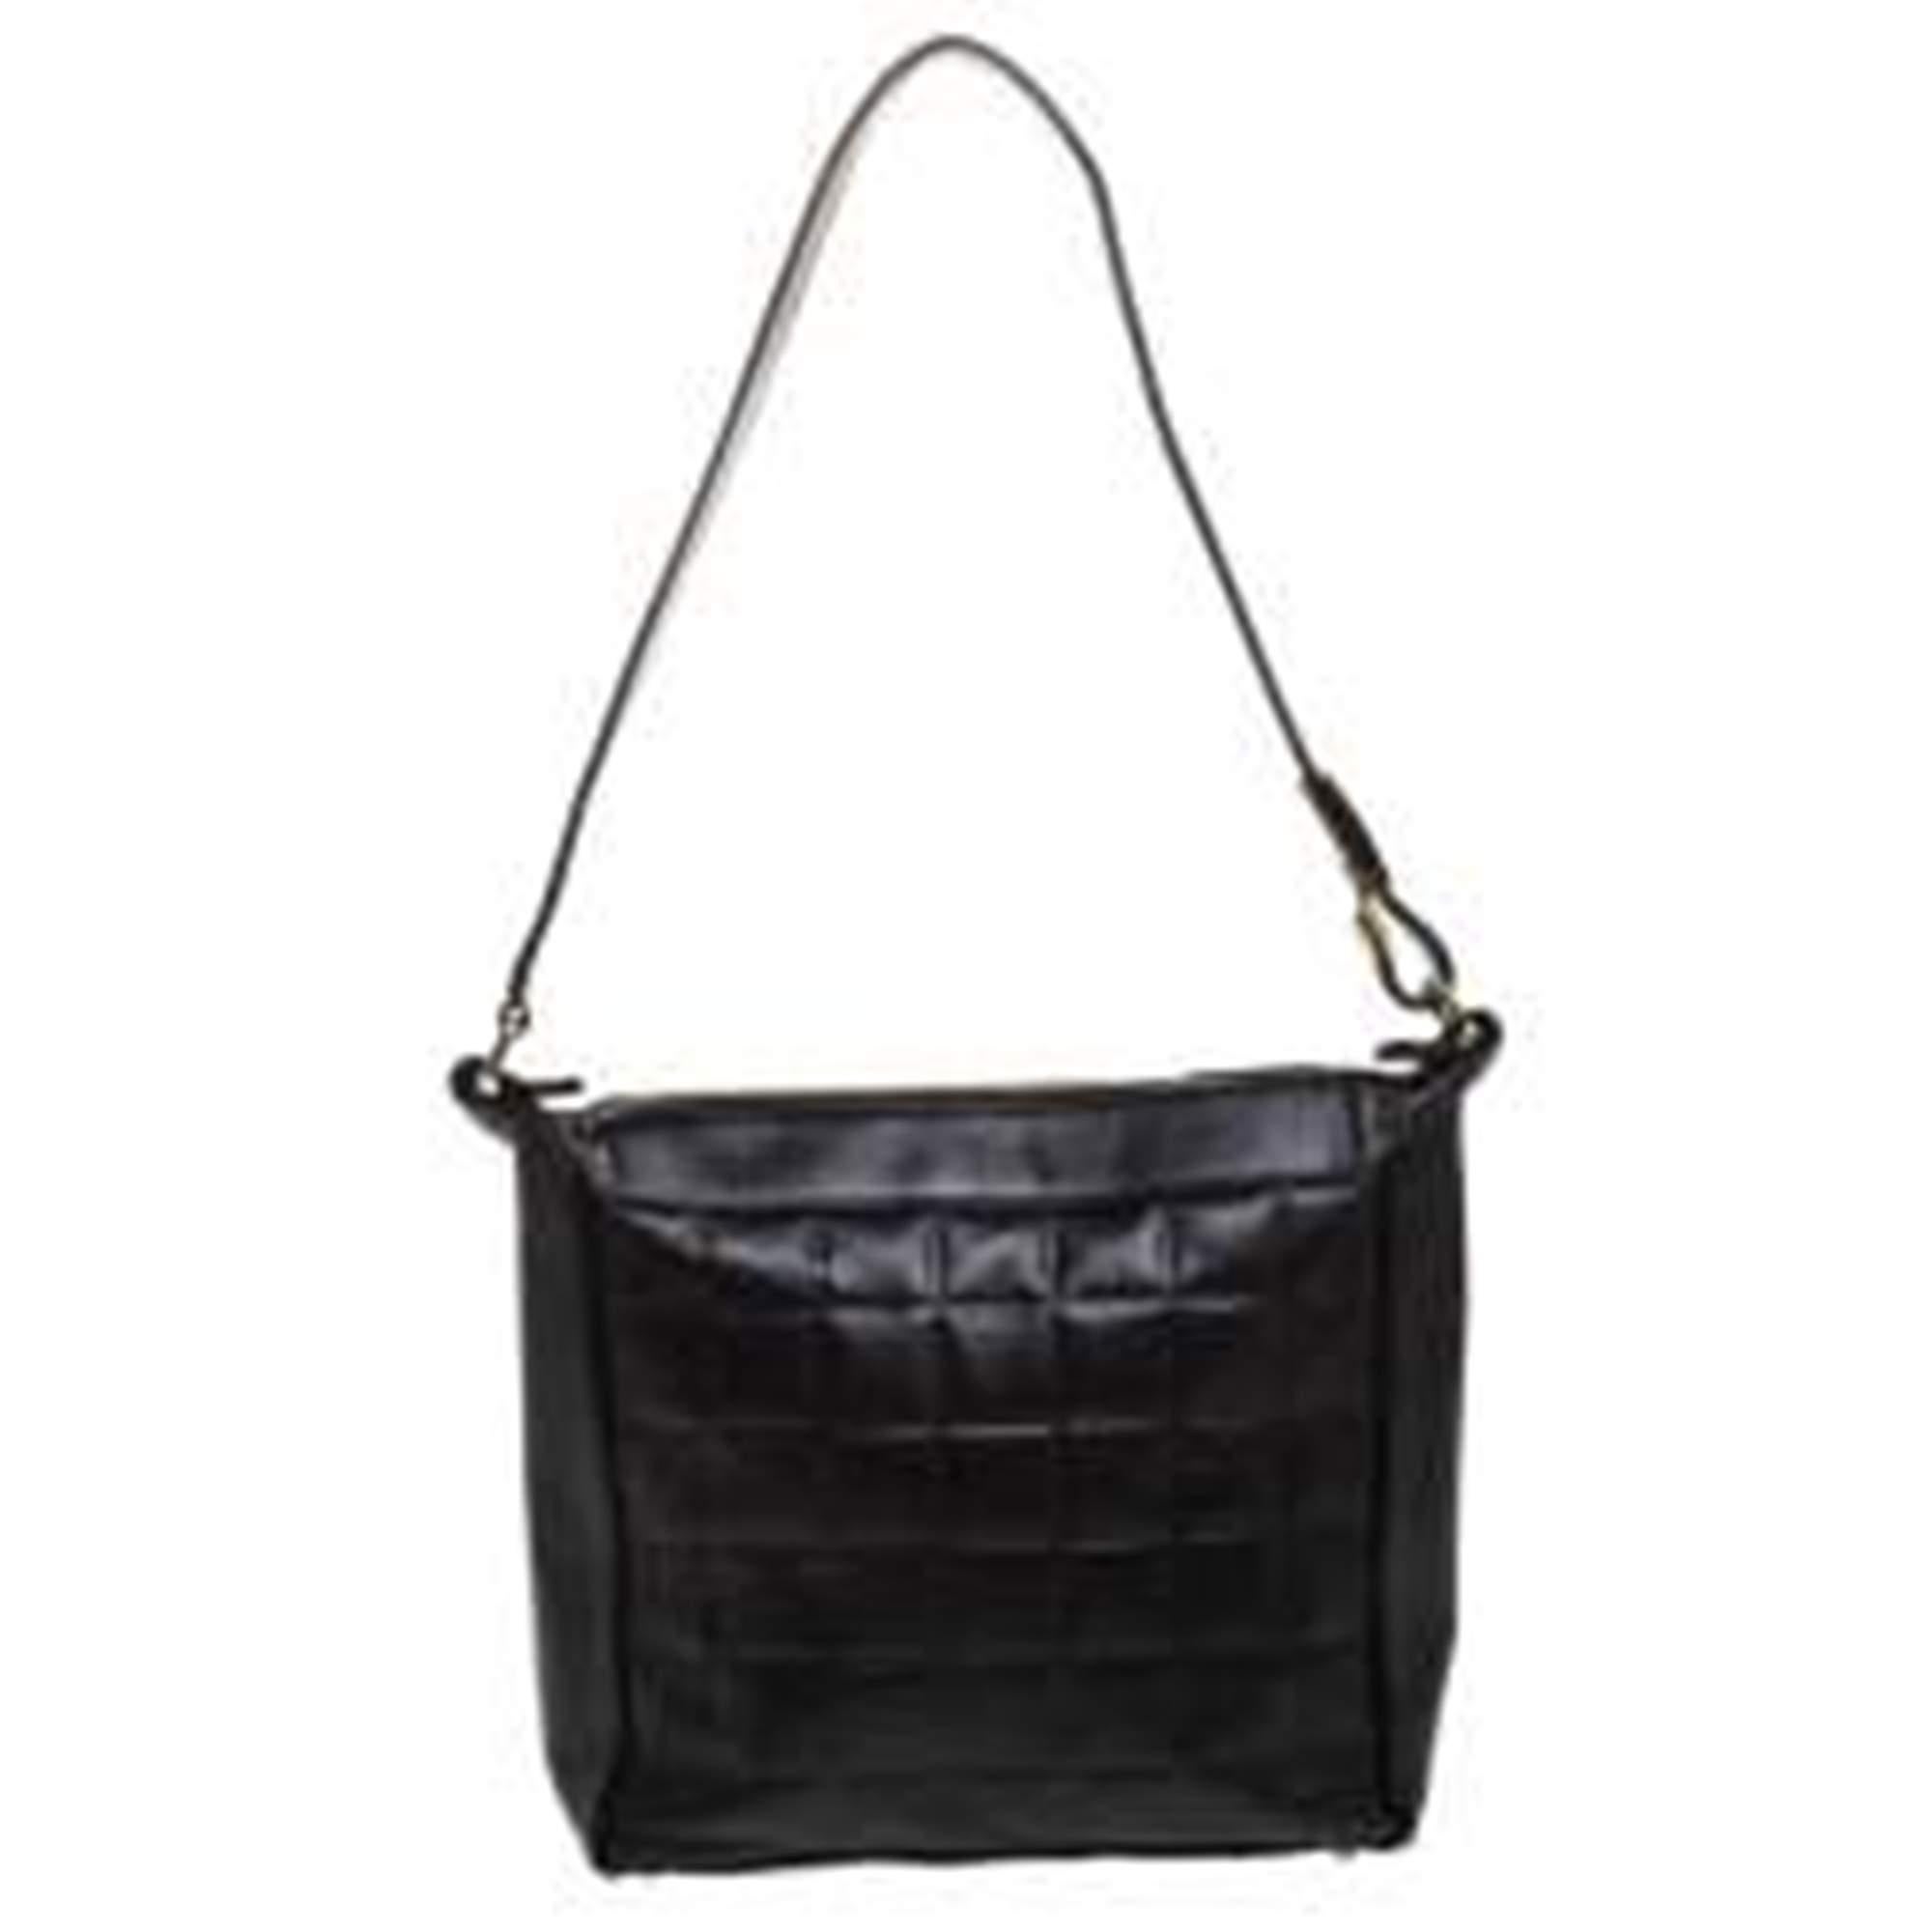 This Chanel black shoulder bag is simply gorgeous! It has been beautifully crafted from leather and designed in their signature Chocolate Bar quilt with the famous CC logo on the front. The bag also hosts a well-sized fabric interior and a single